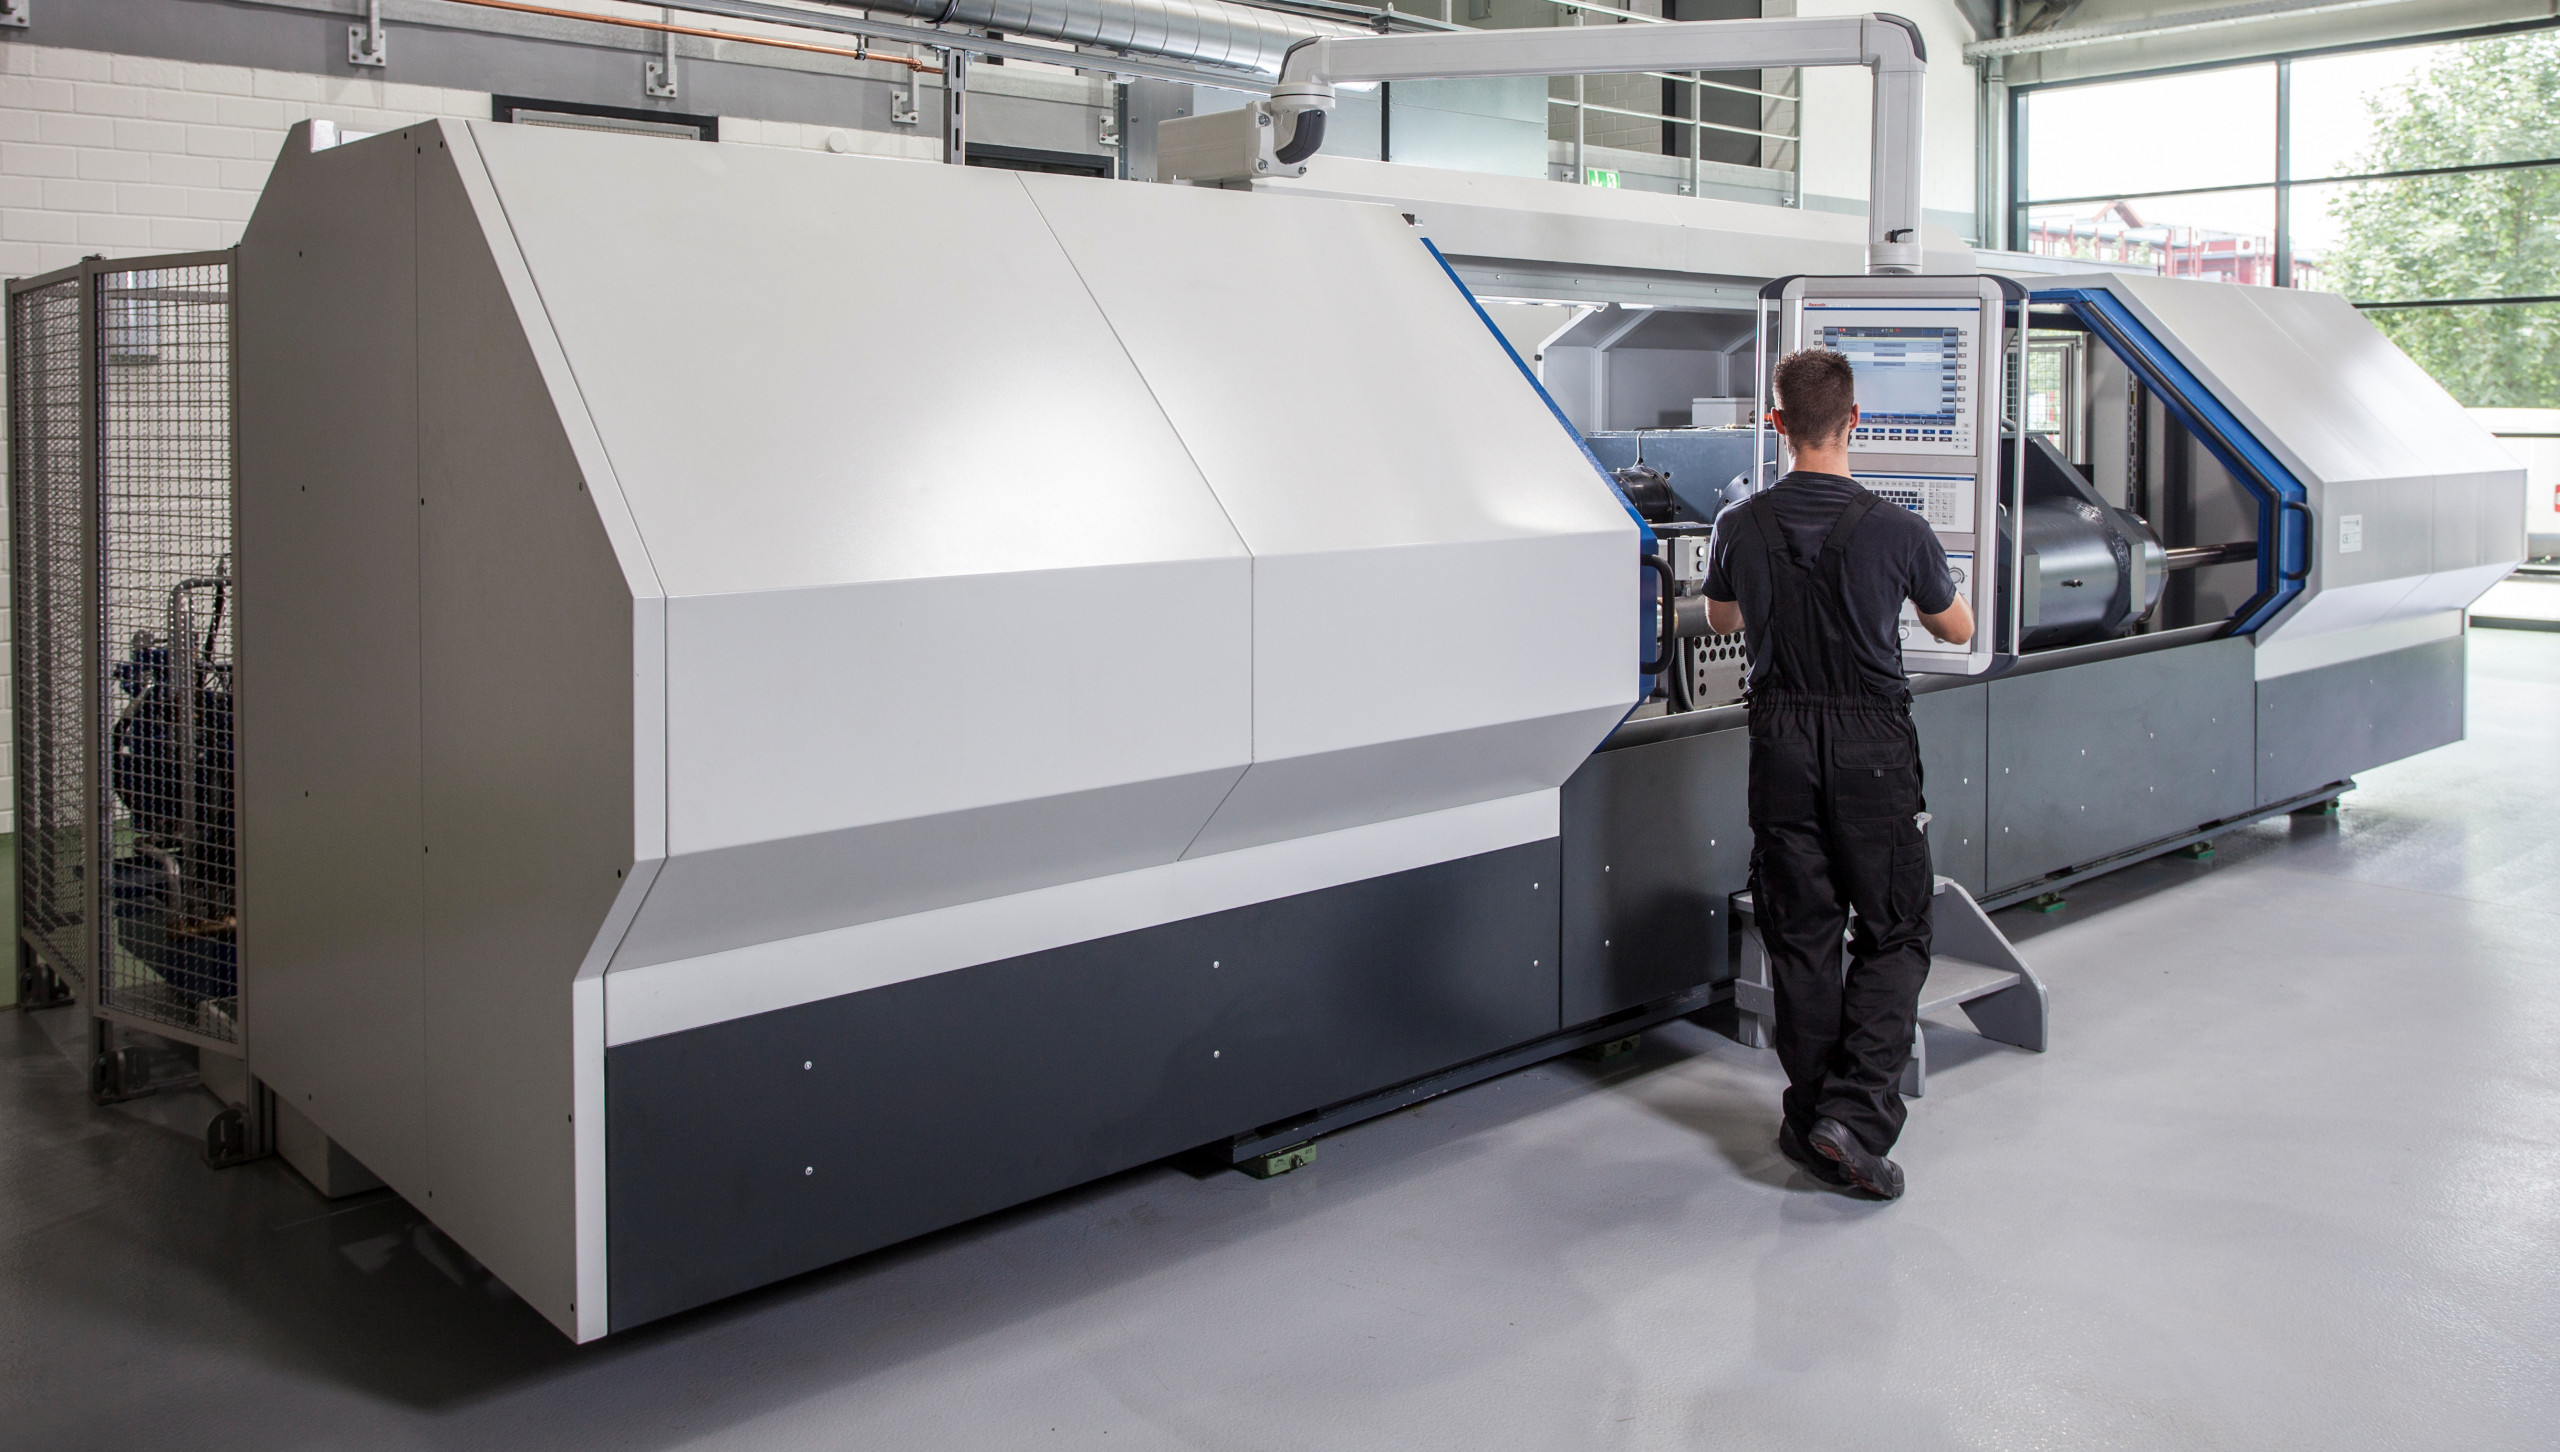 At Raiser, the user has the choice: stand-alone machine with manual loading ... © Klaus Raiser GmbH & Co. KG